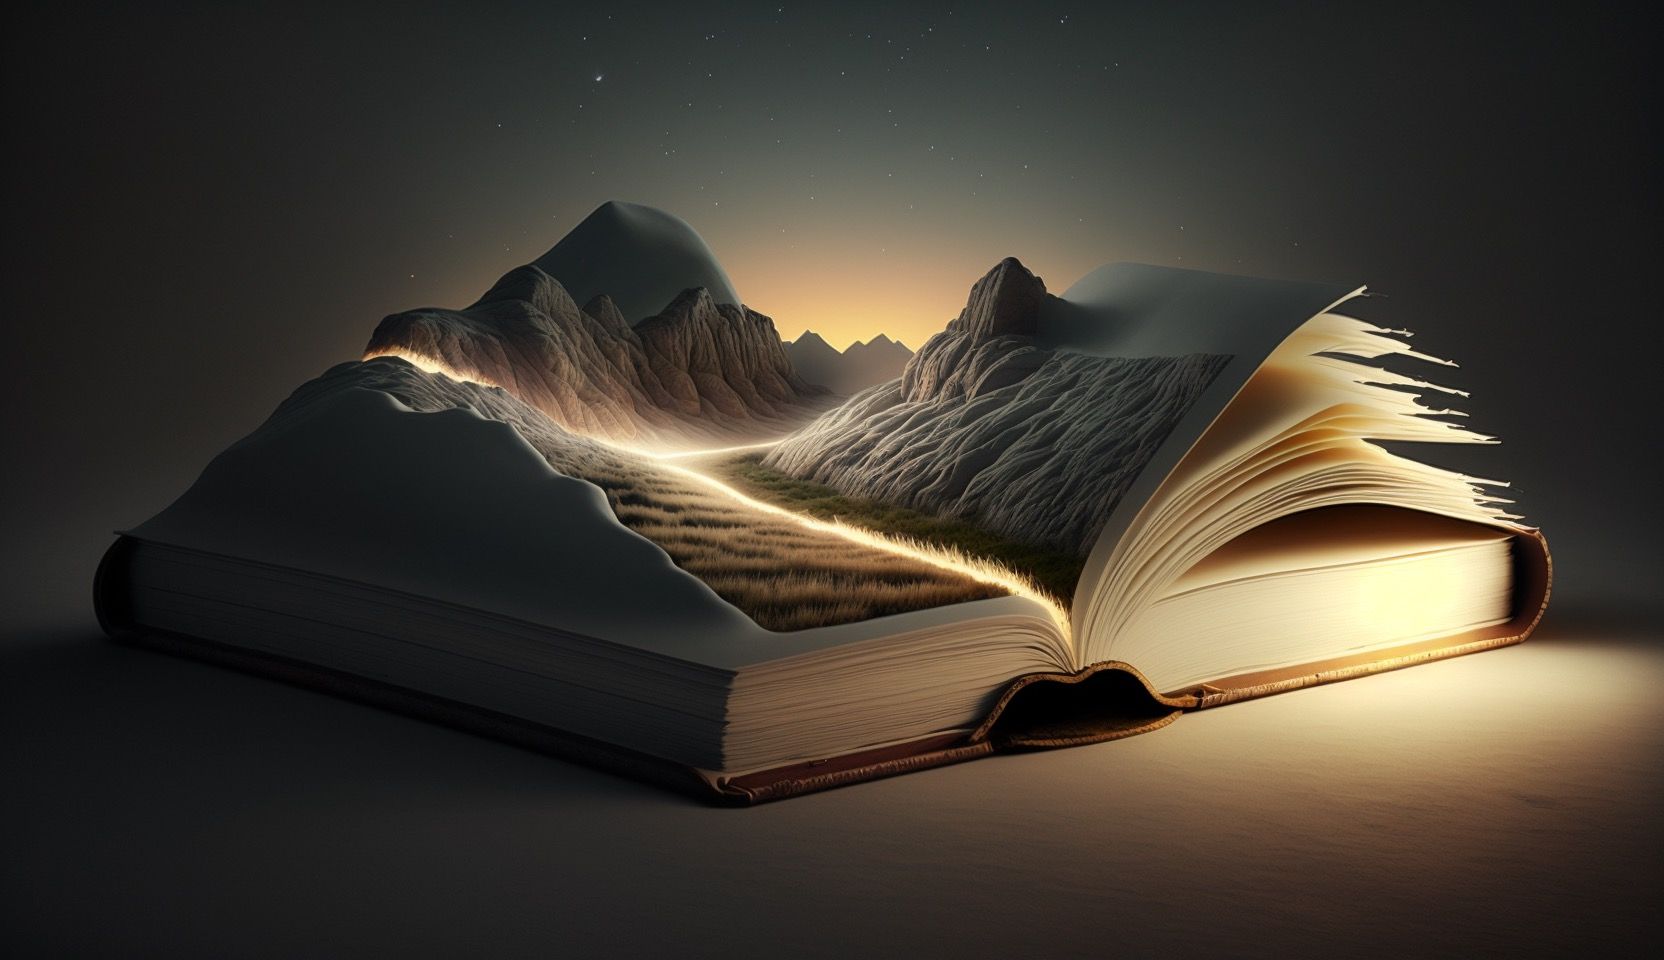 AI-generated image of an open book with a landscape and light being omitted from it